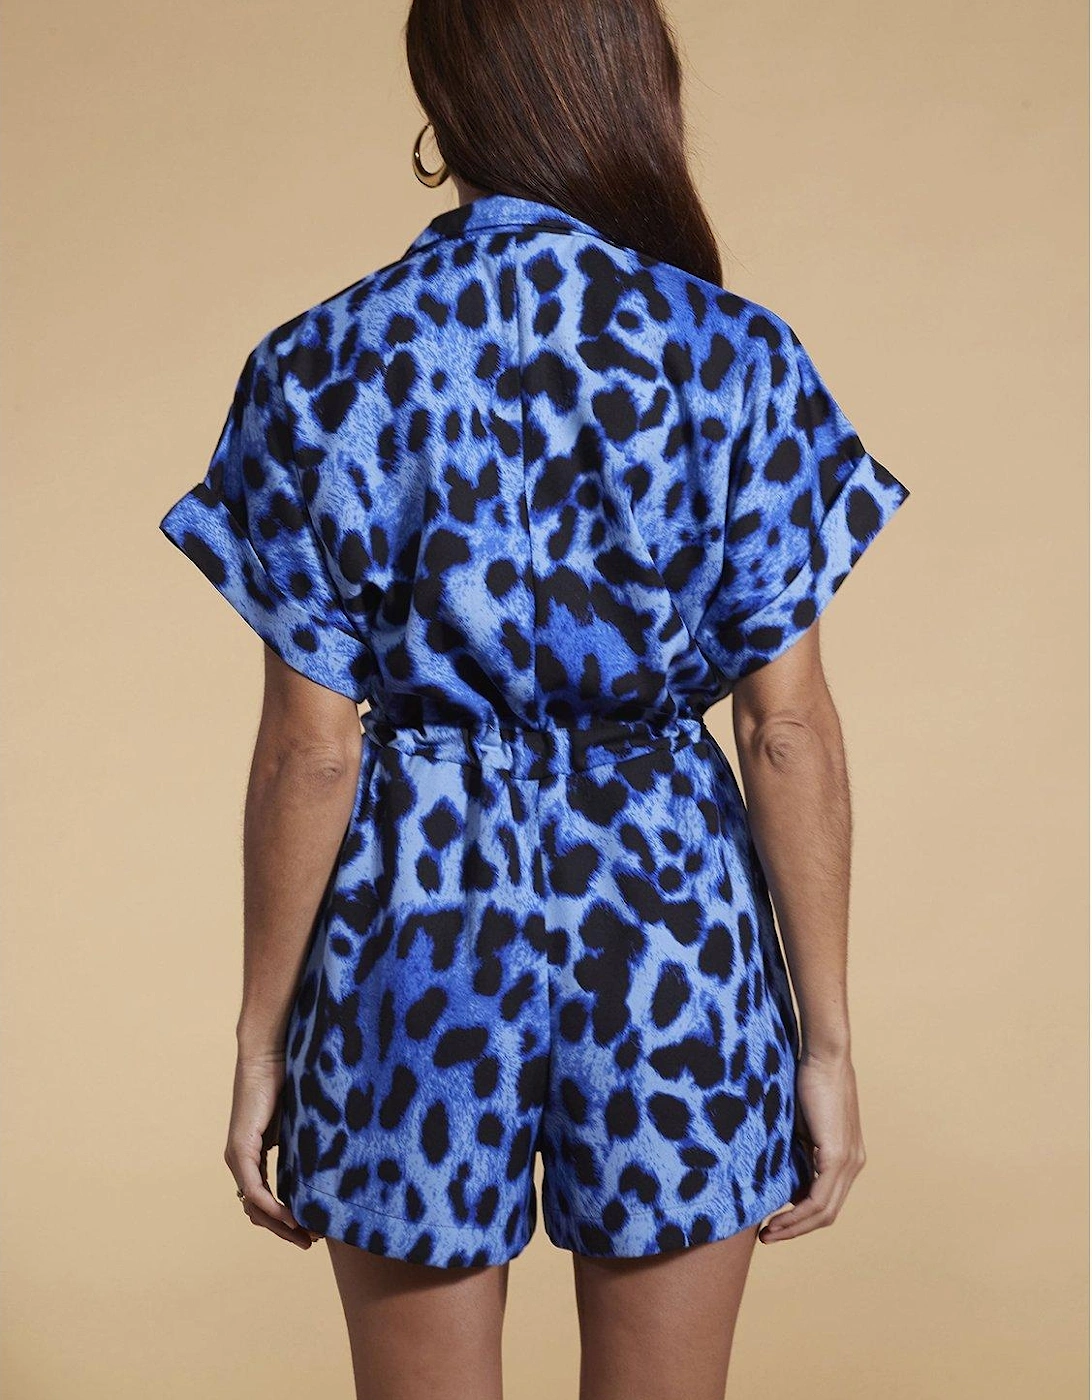 Leopard Print Cotton Playsuit with Kimono Sleeves - Blue